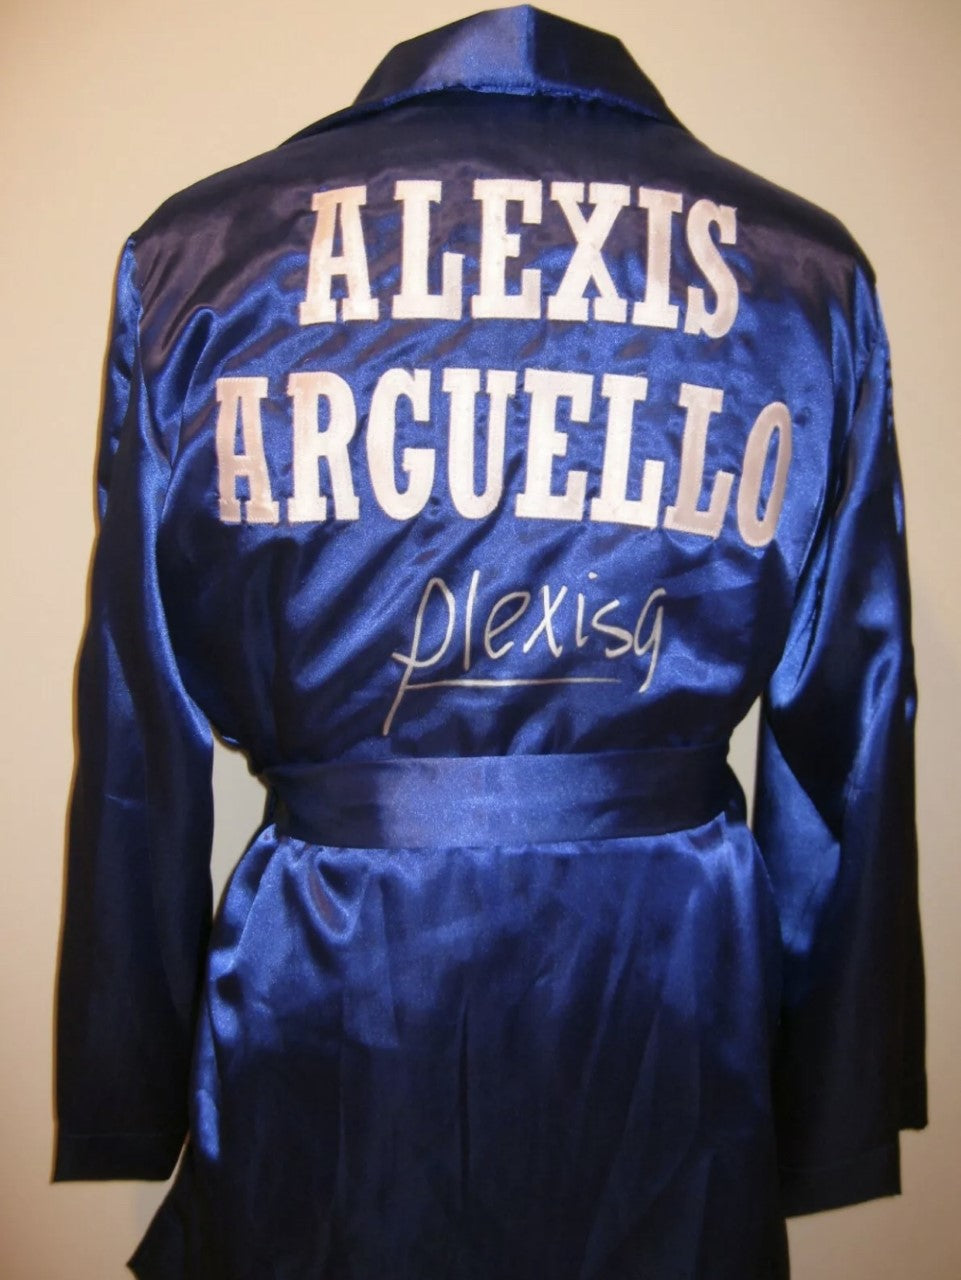 Alexis Arguello Signed Autographed Boxing Custom Rare Robe ASI Certified